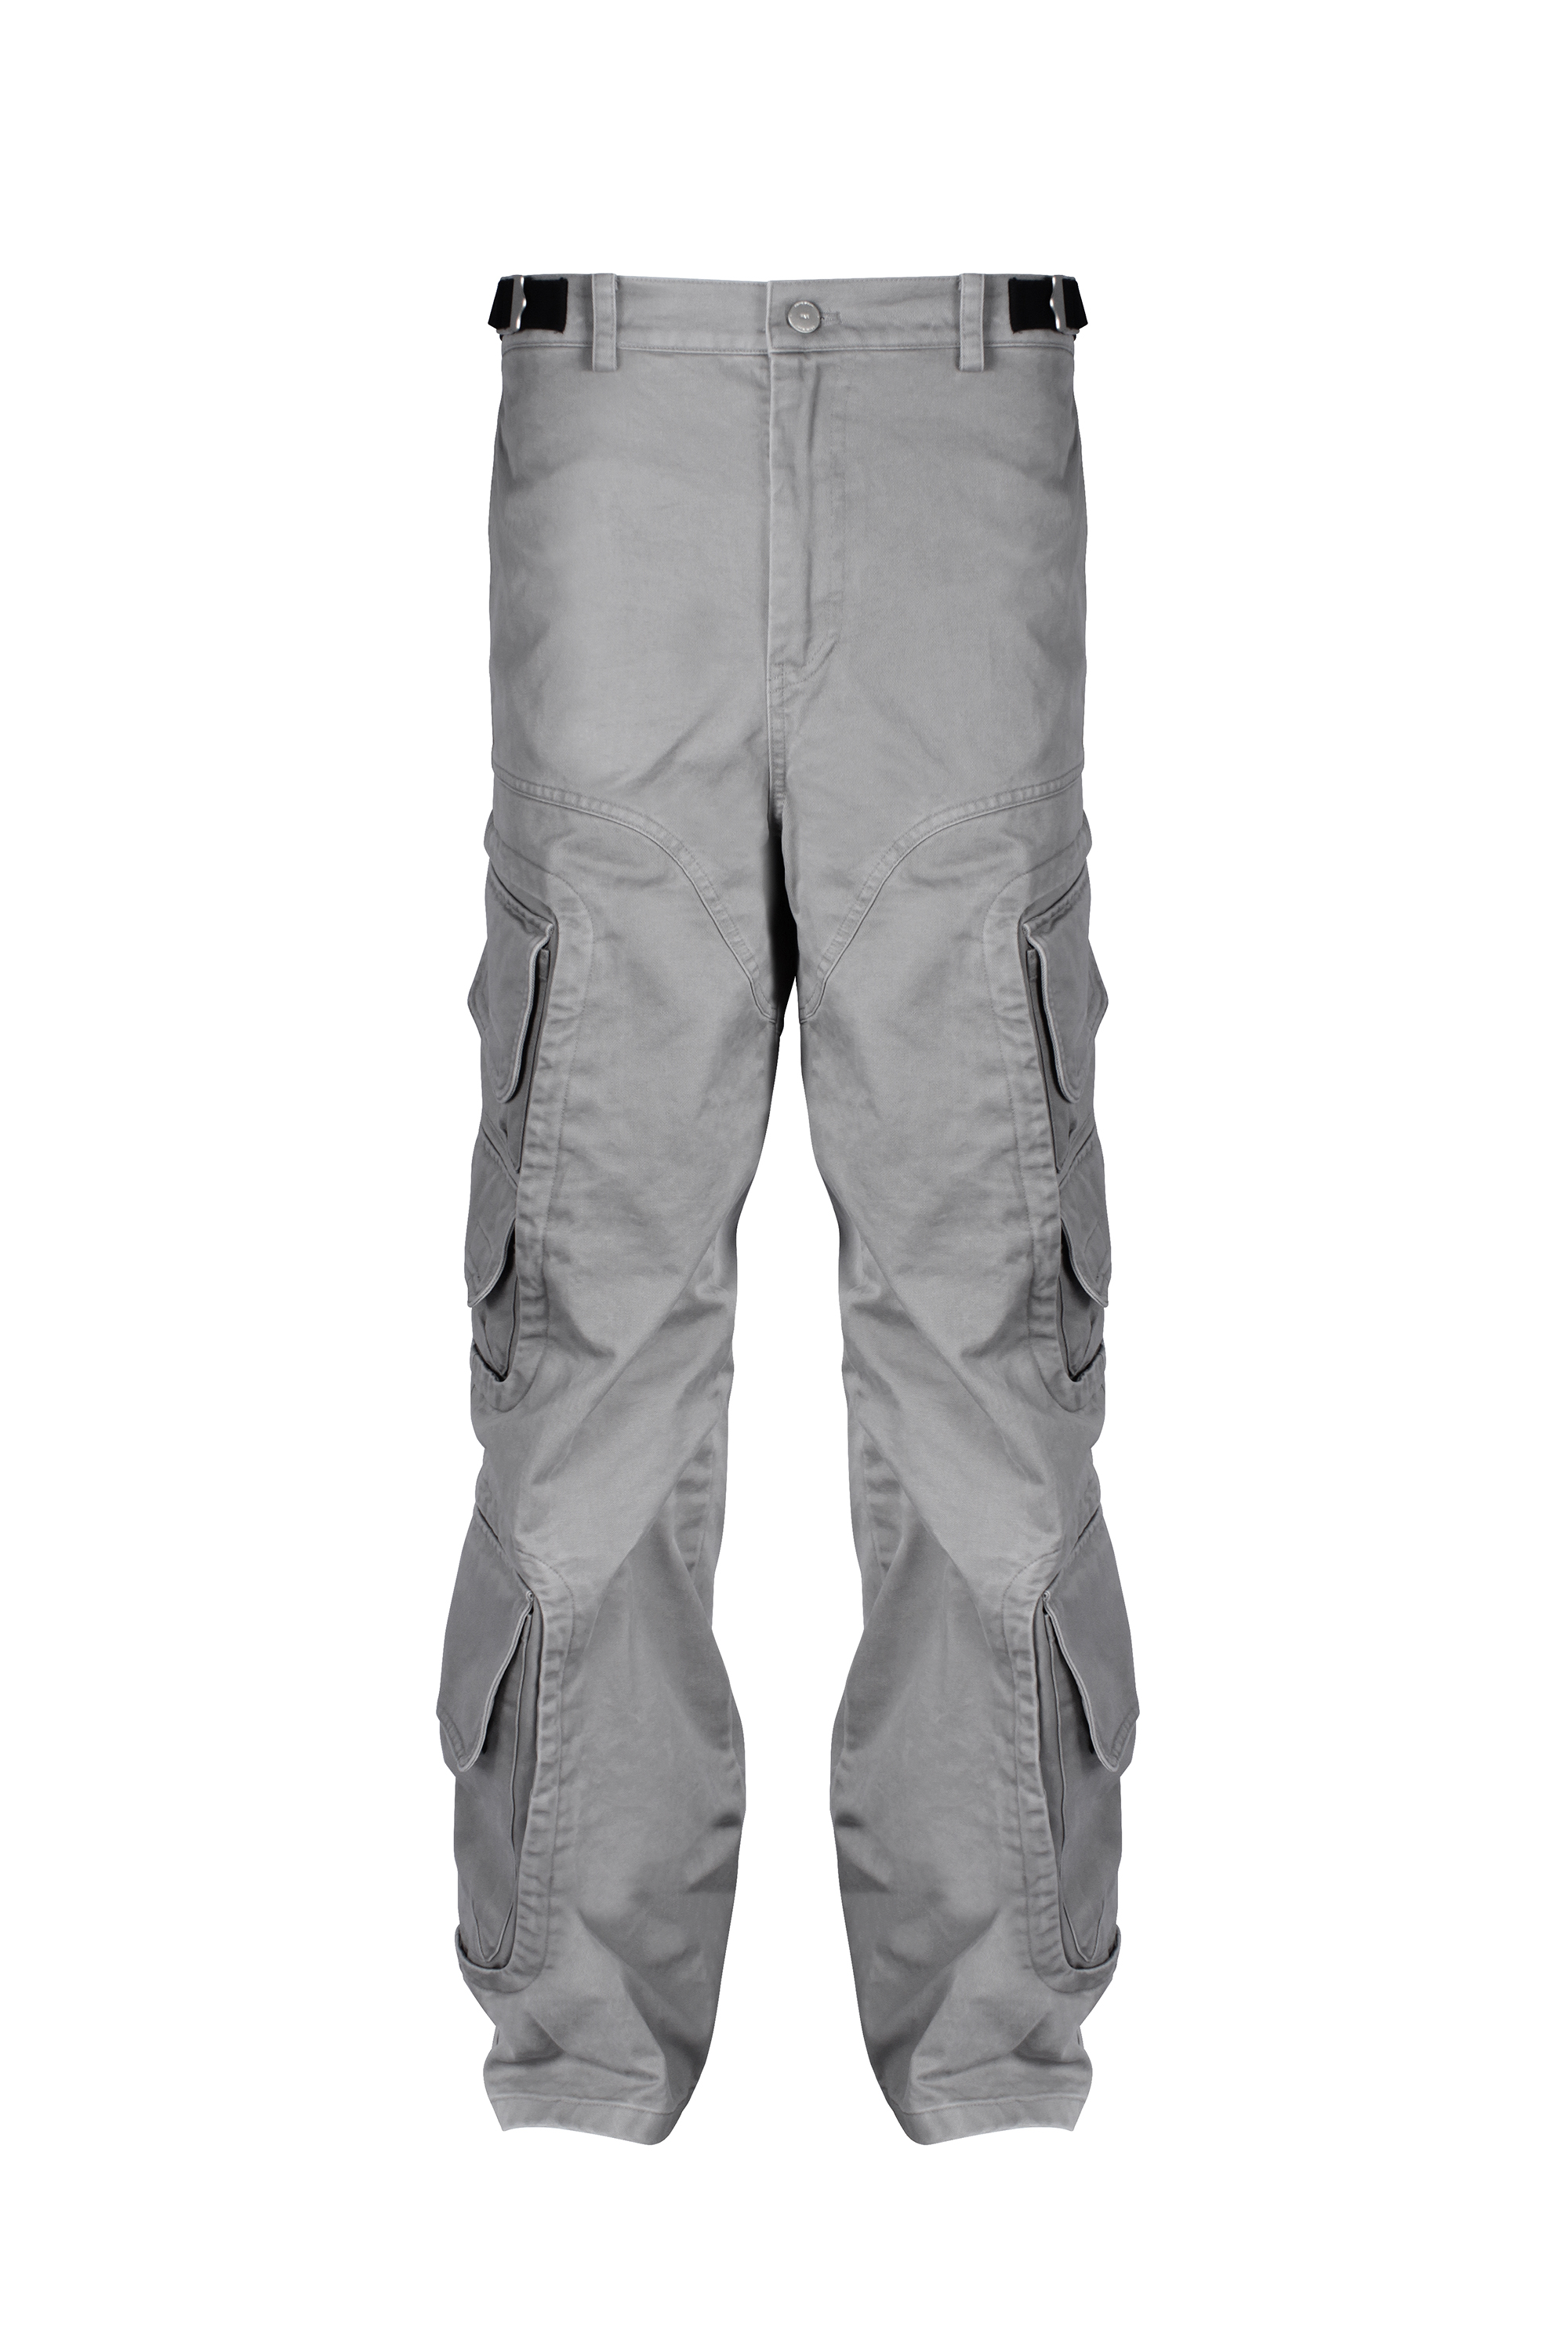 FAR WASHED CARGO PANTS_GRAY